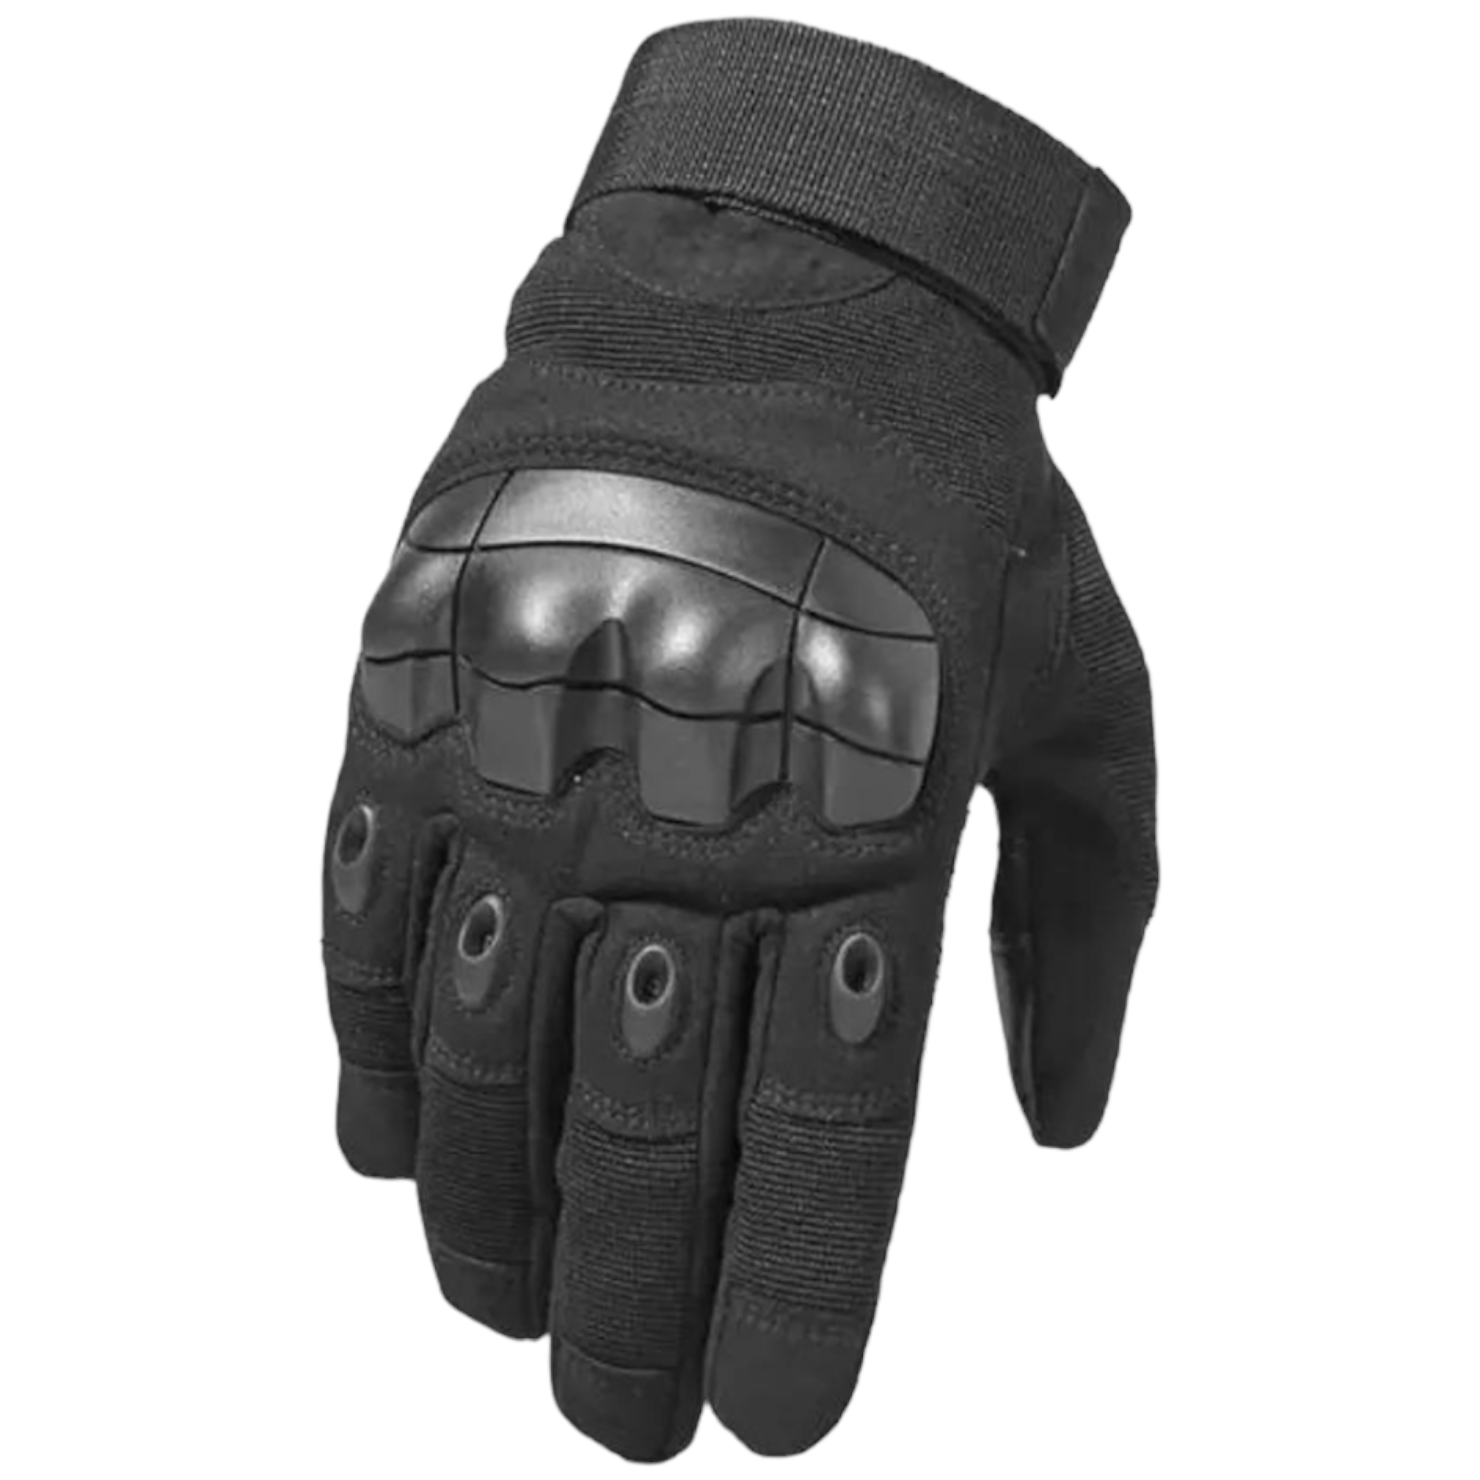 Guantes Tacticos Completos Airsoft Deportes Paintball GT15